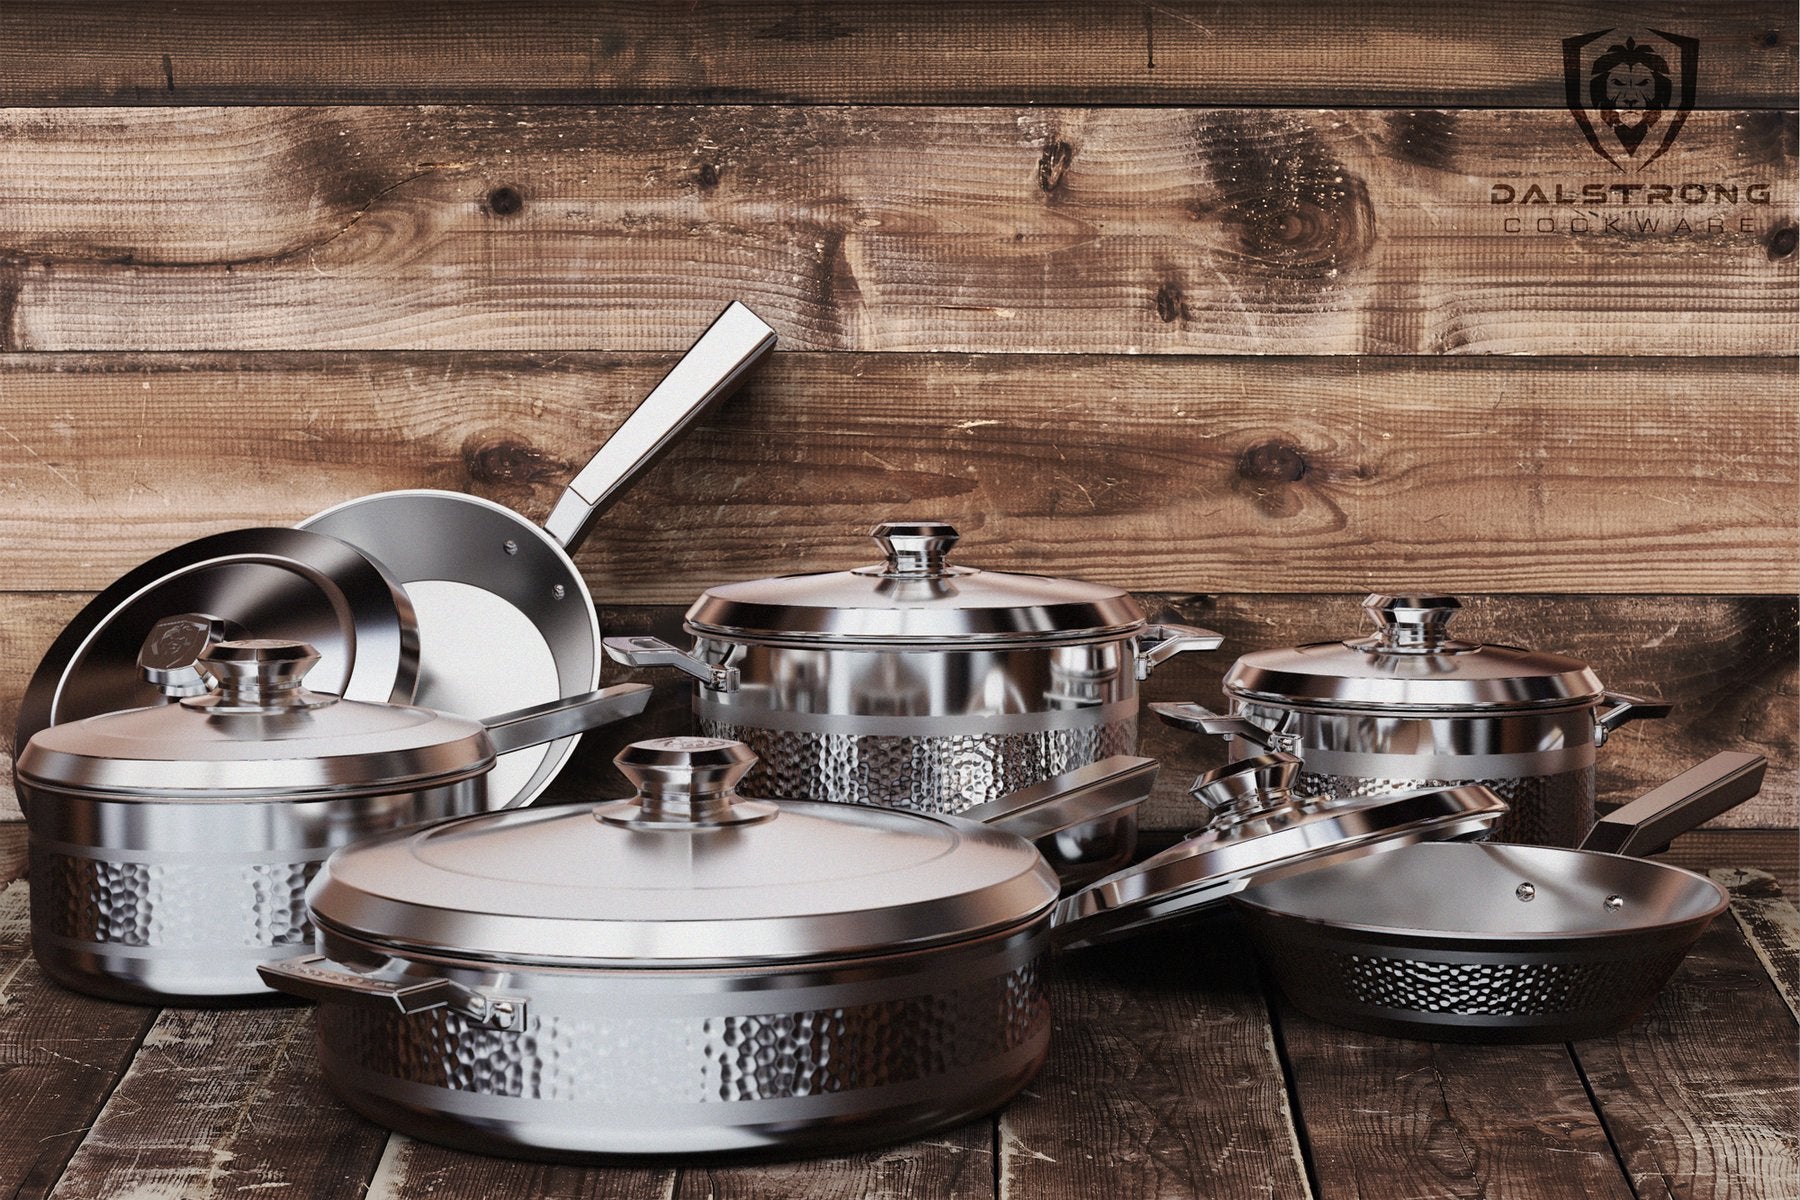 How To Find And Buy The Best Pots And Pans Set in 2023 – Dalstrong